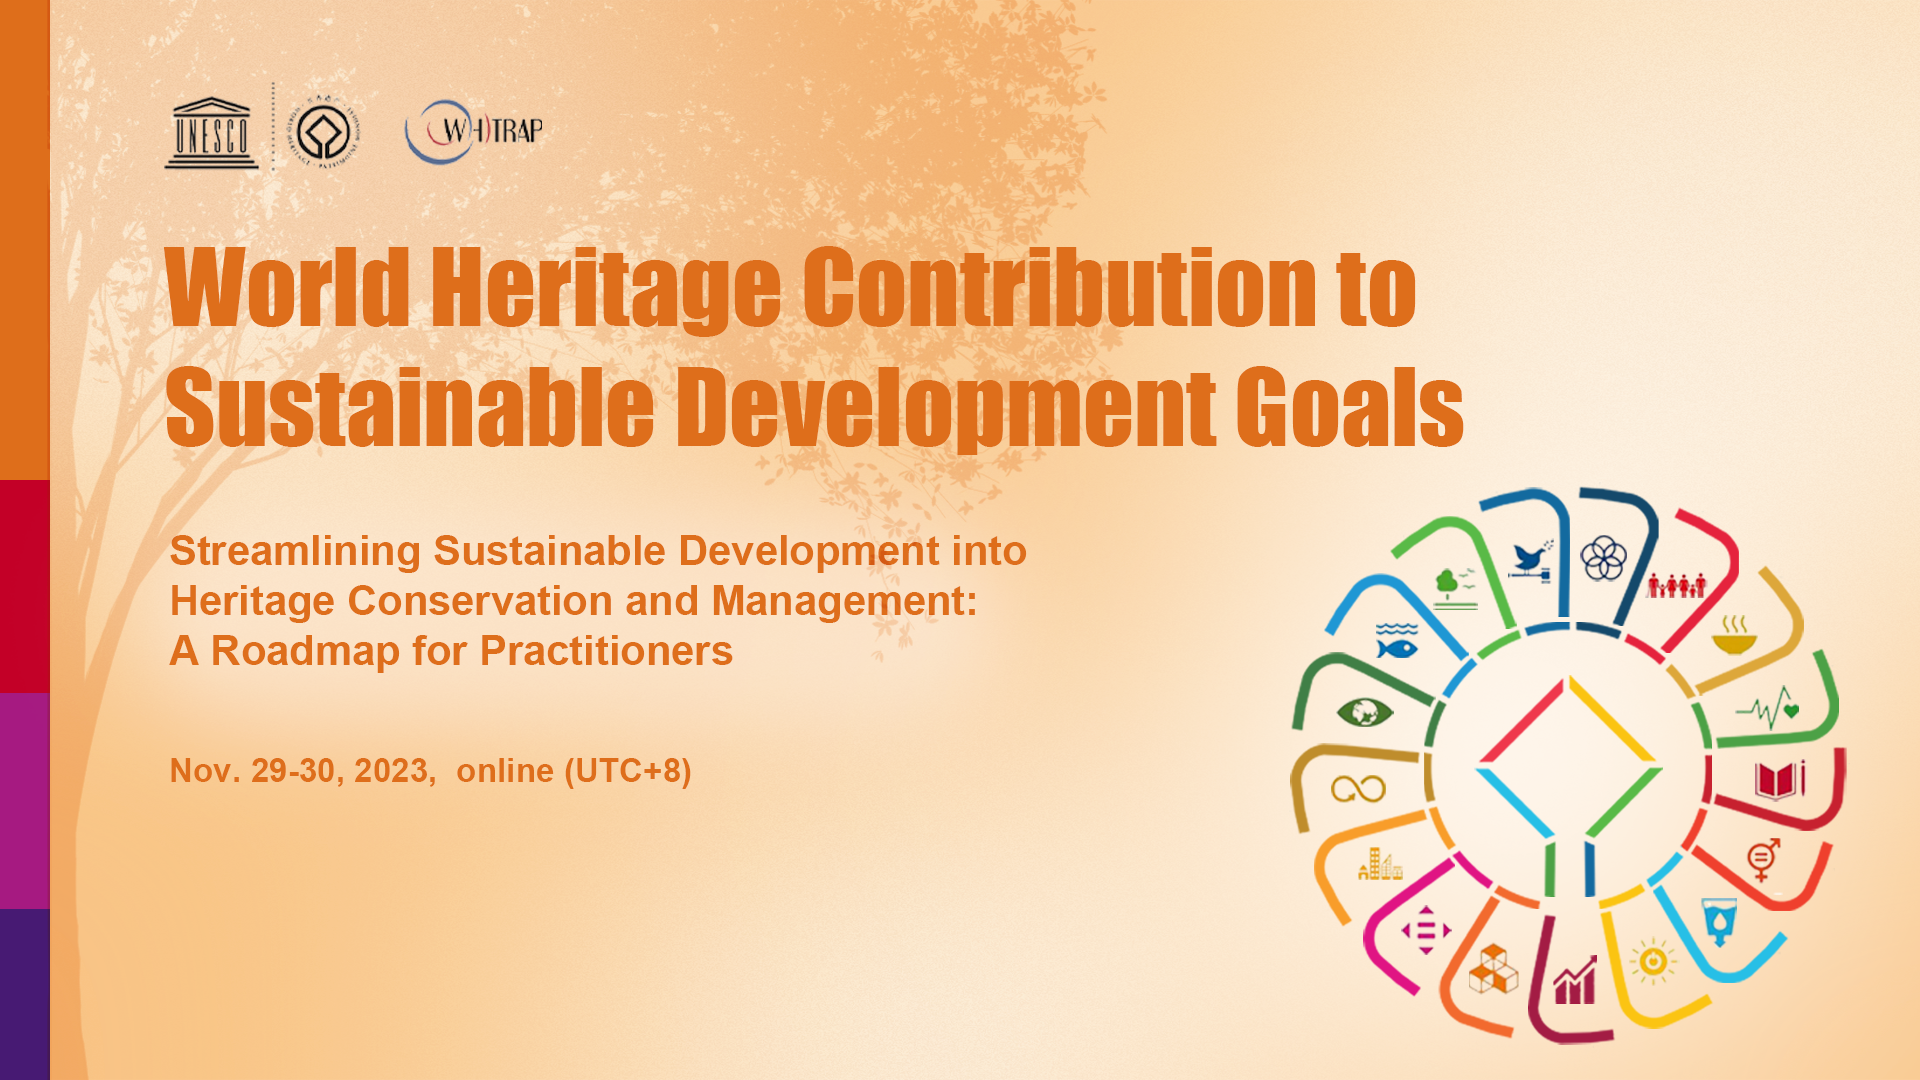 2023 HeritAP Annual Meeting on World Heritage Contribution to Sustainable Development Goals